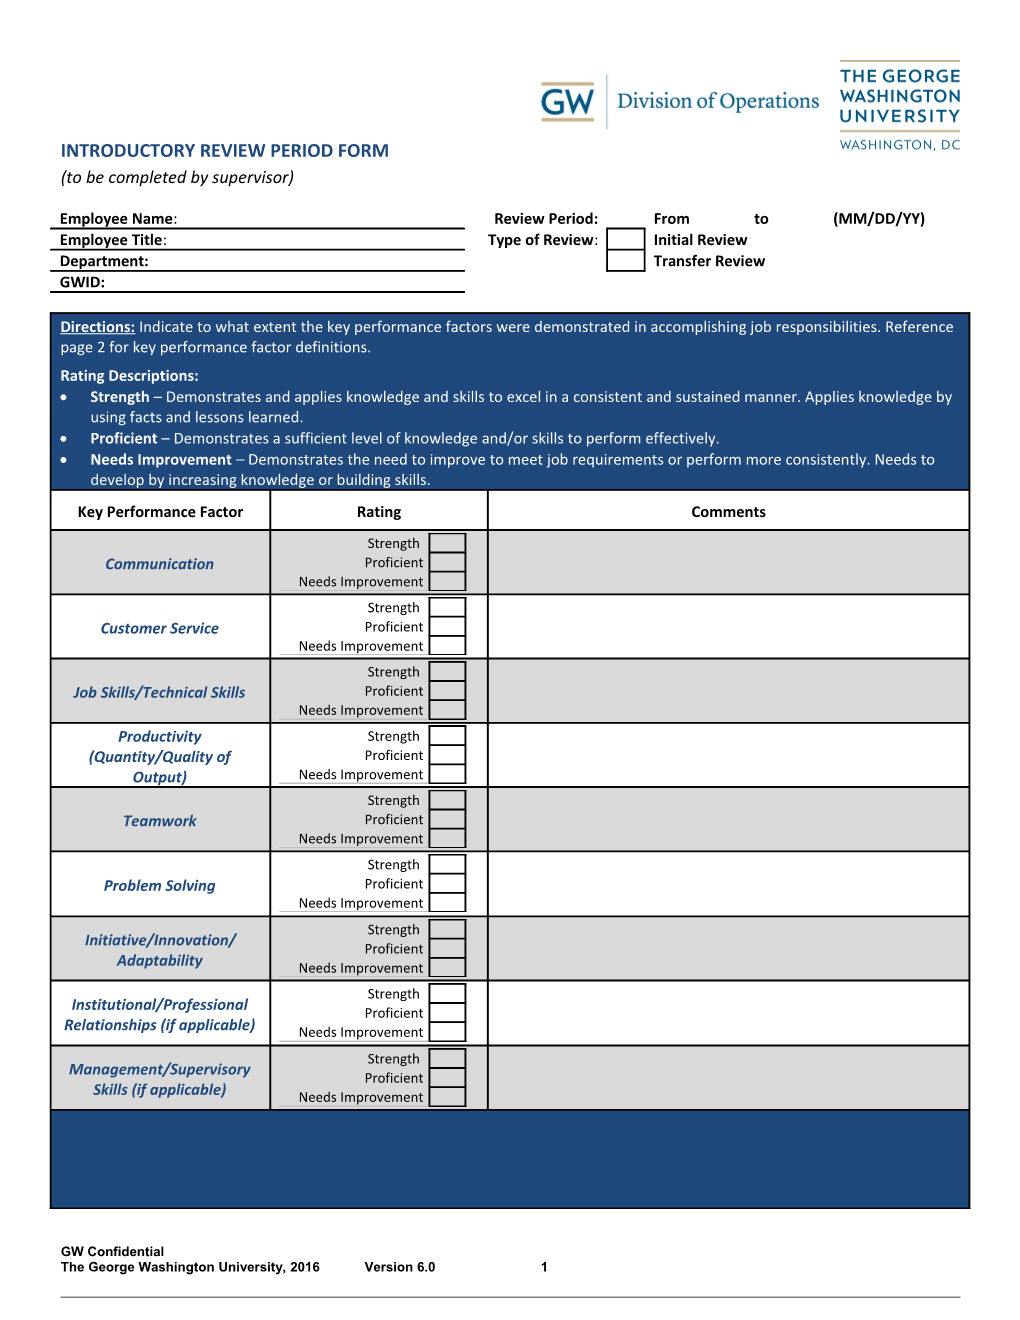 INTRODUCTORY REVIEW PERIOD FORM (To Be Completed by Supervisor)